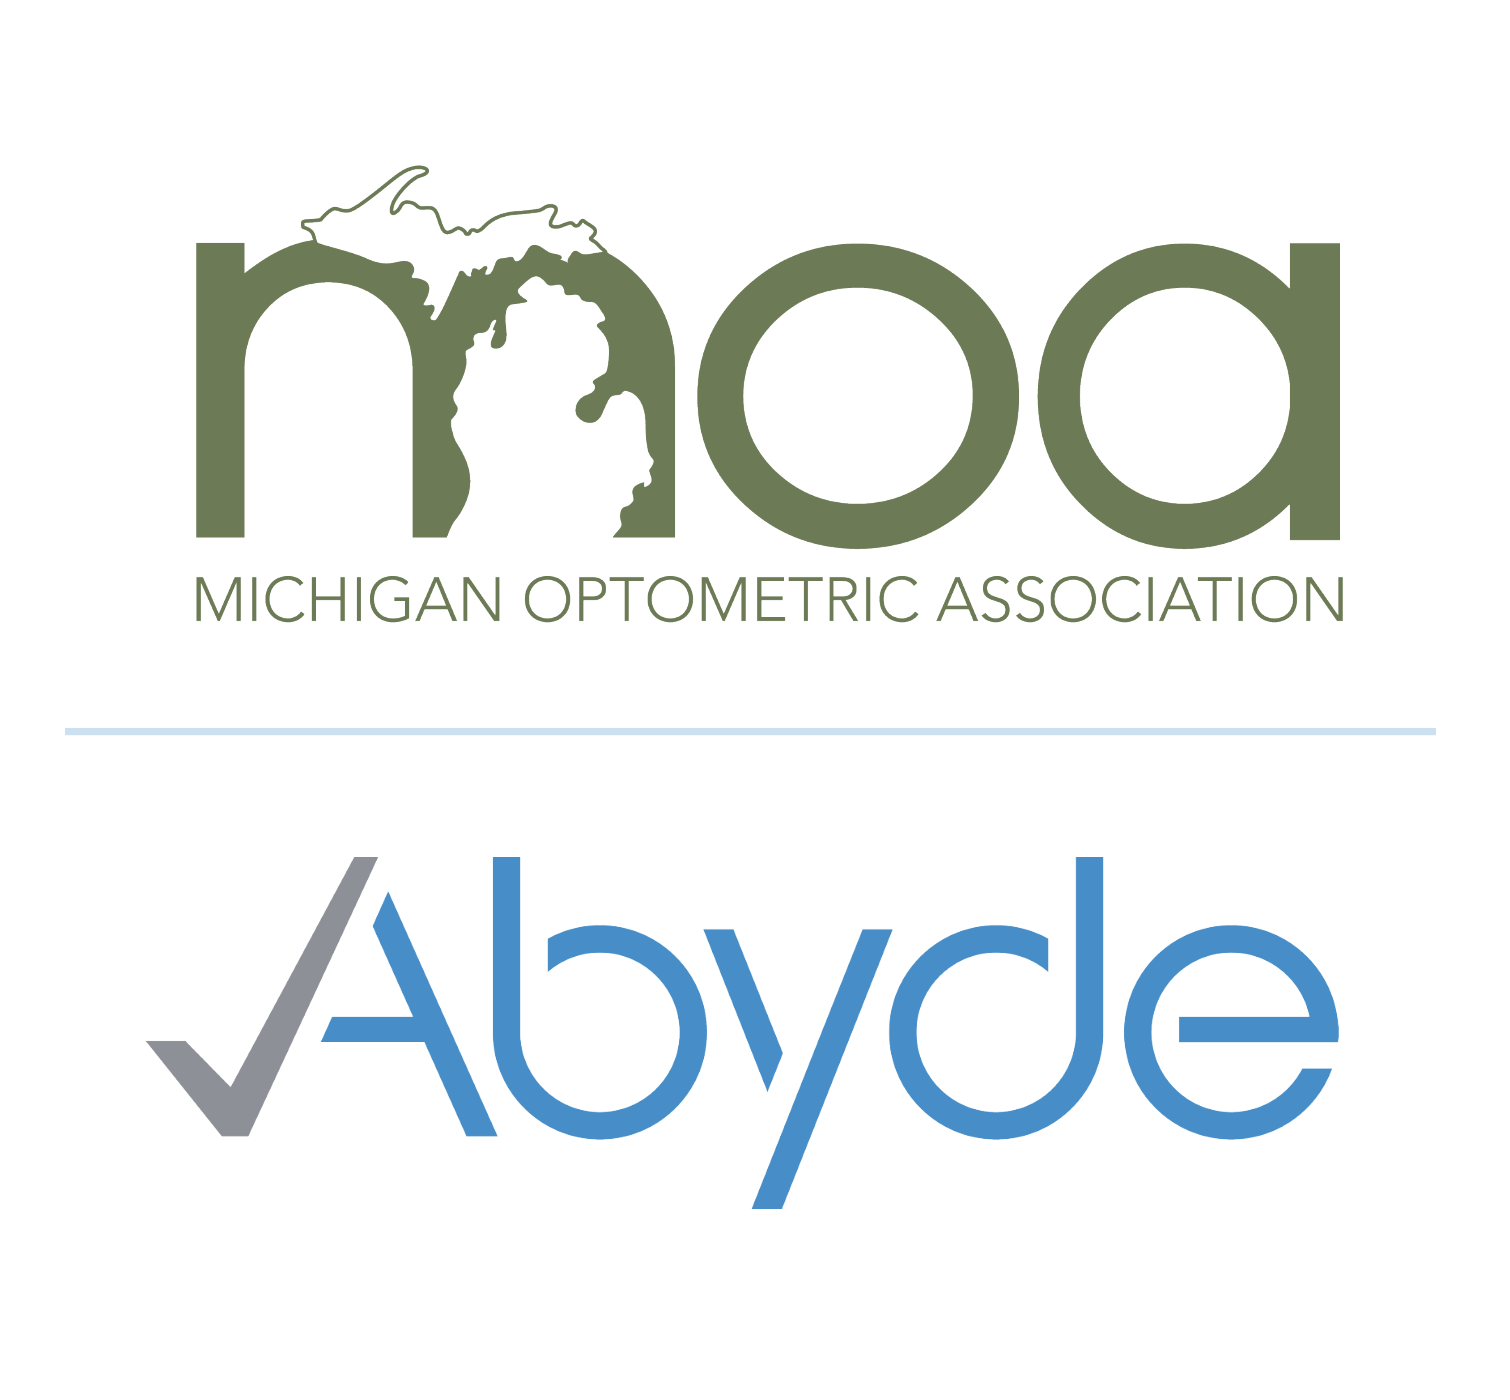 Abyde and Michigan Optometric Association partner to provide complete HIPAA compliance solutions to independent eye care practices